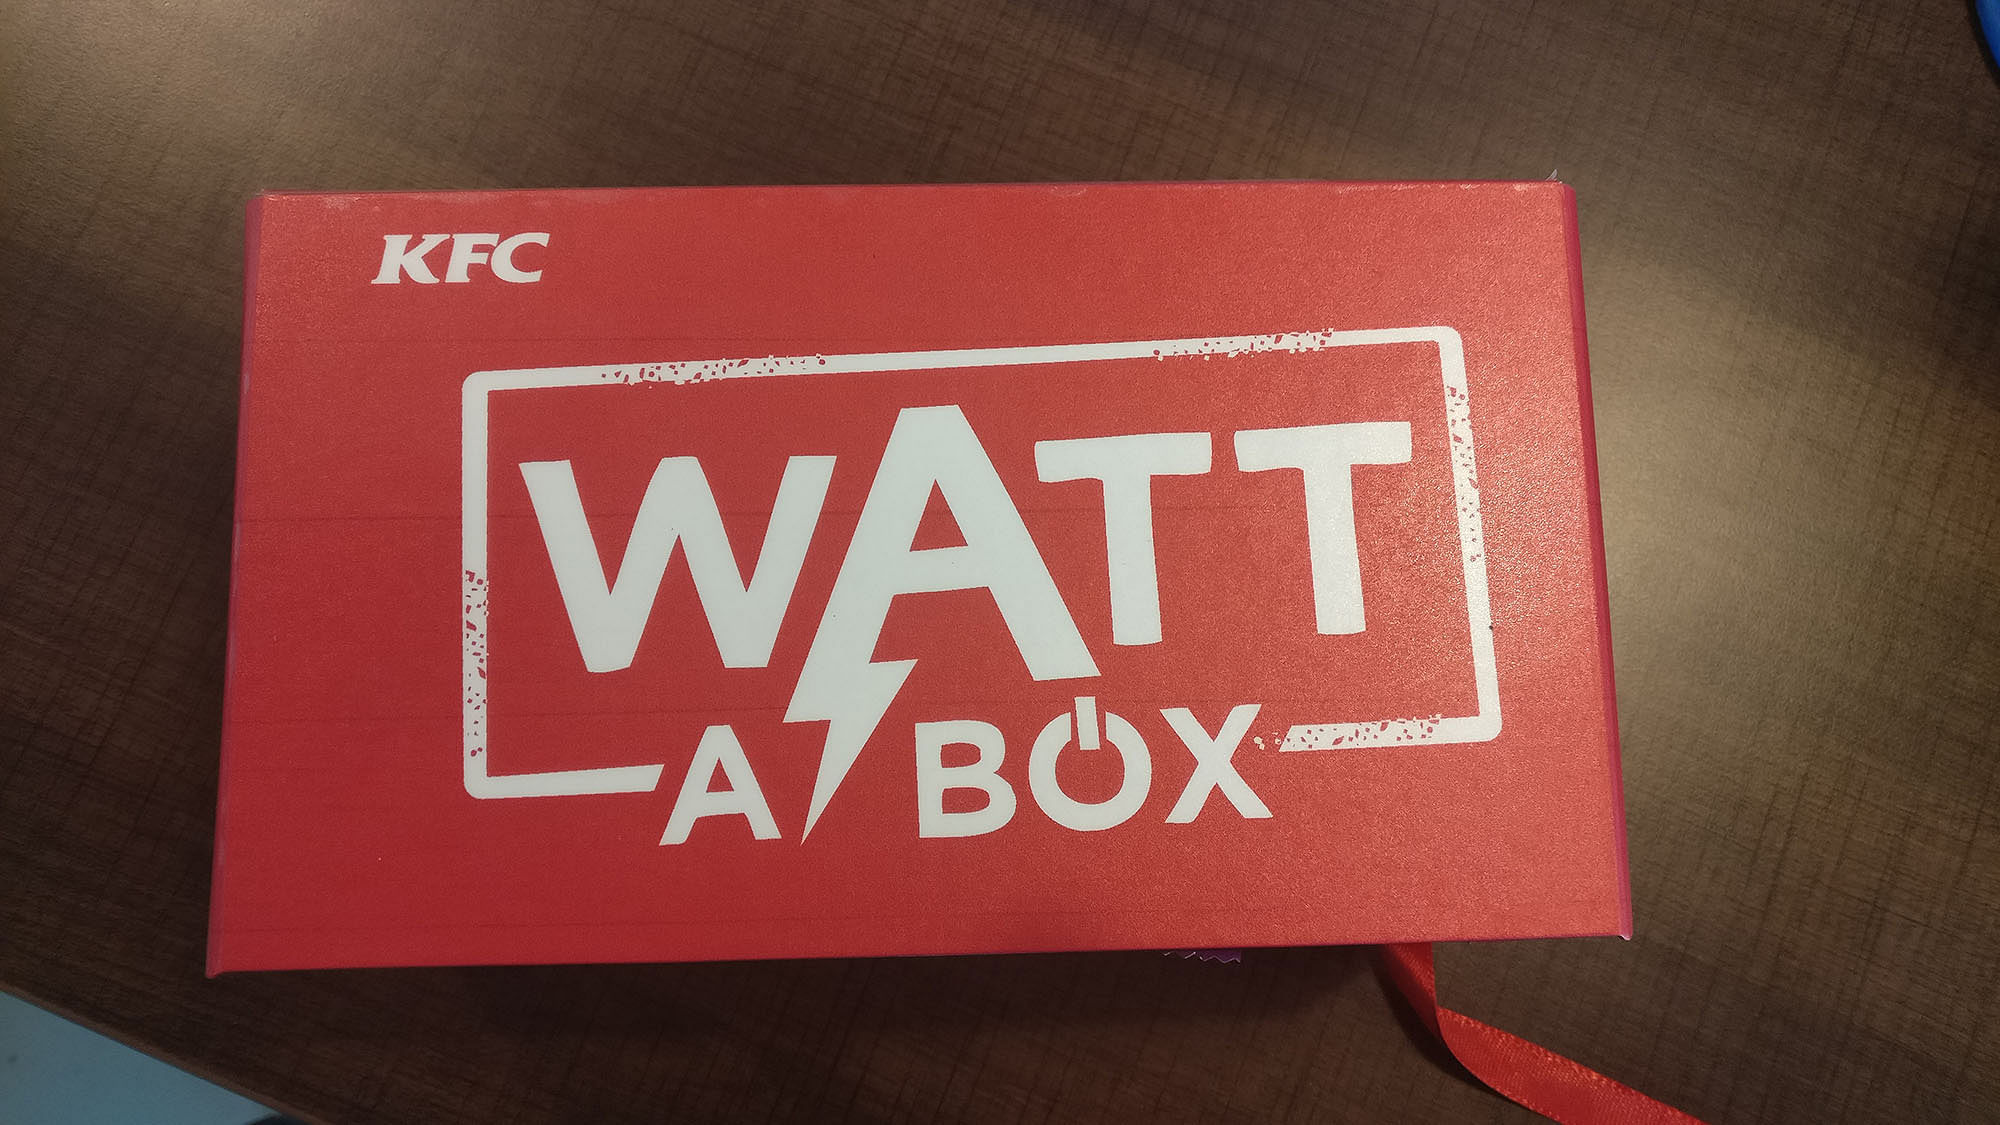 KFC meal box which comes with a powerbank. (Photo: <b>The Quint</b>)